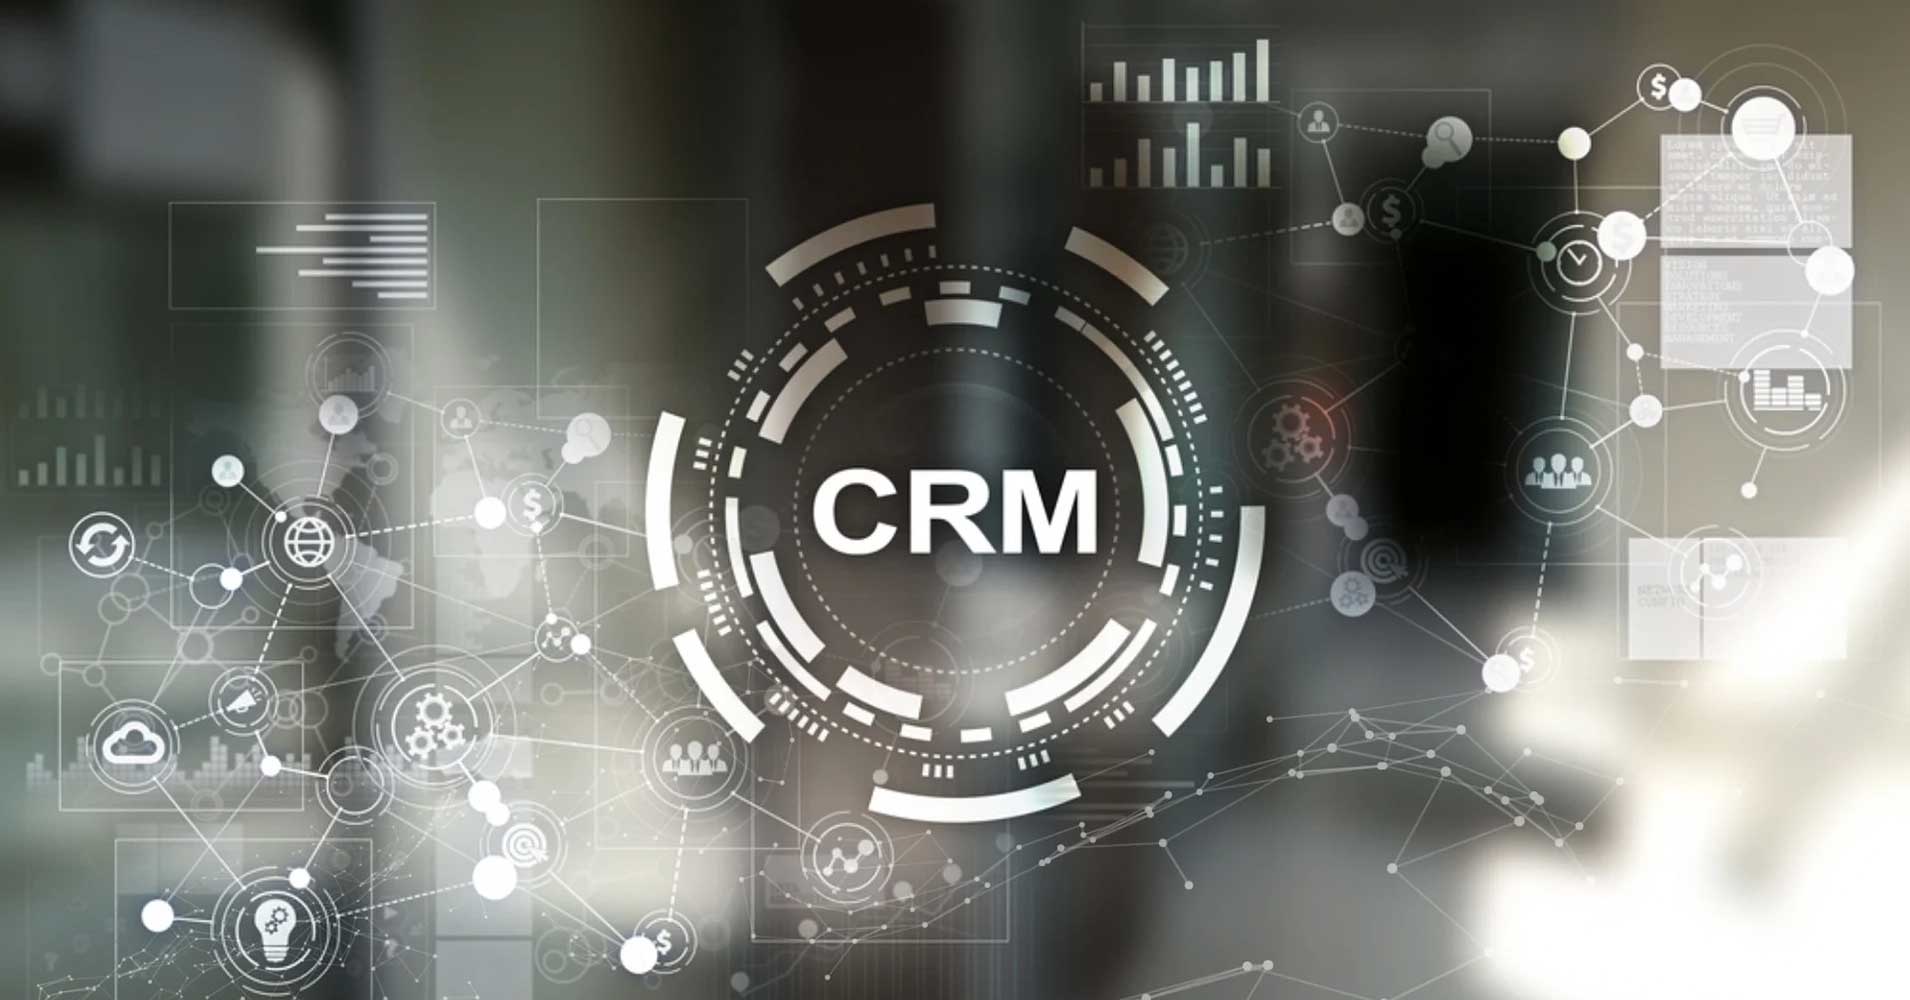 CRM system - what and why?